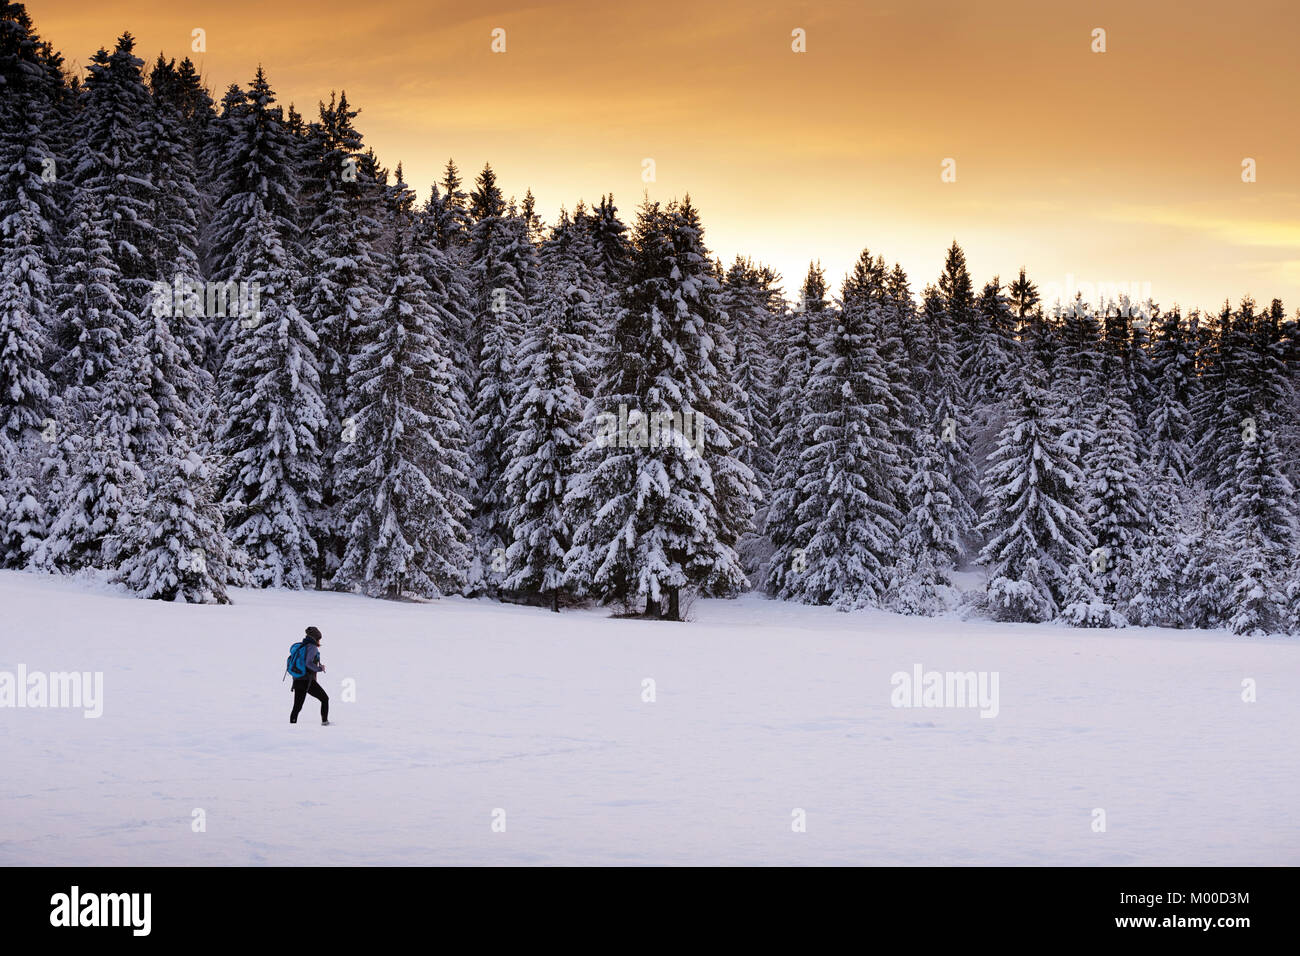 Woman walking in snow at sunset over snow covered pine forest, Bloke, Cerknica, Slovenia. Stock Photo